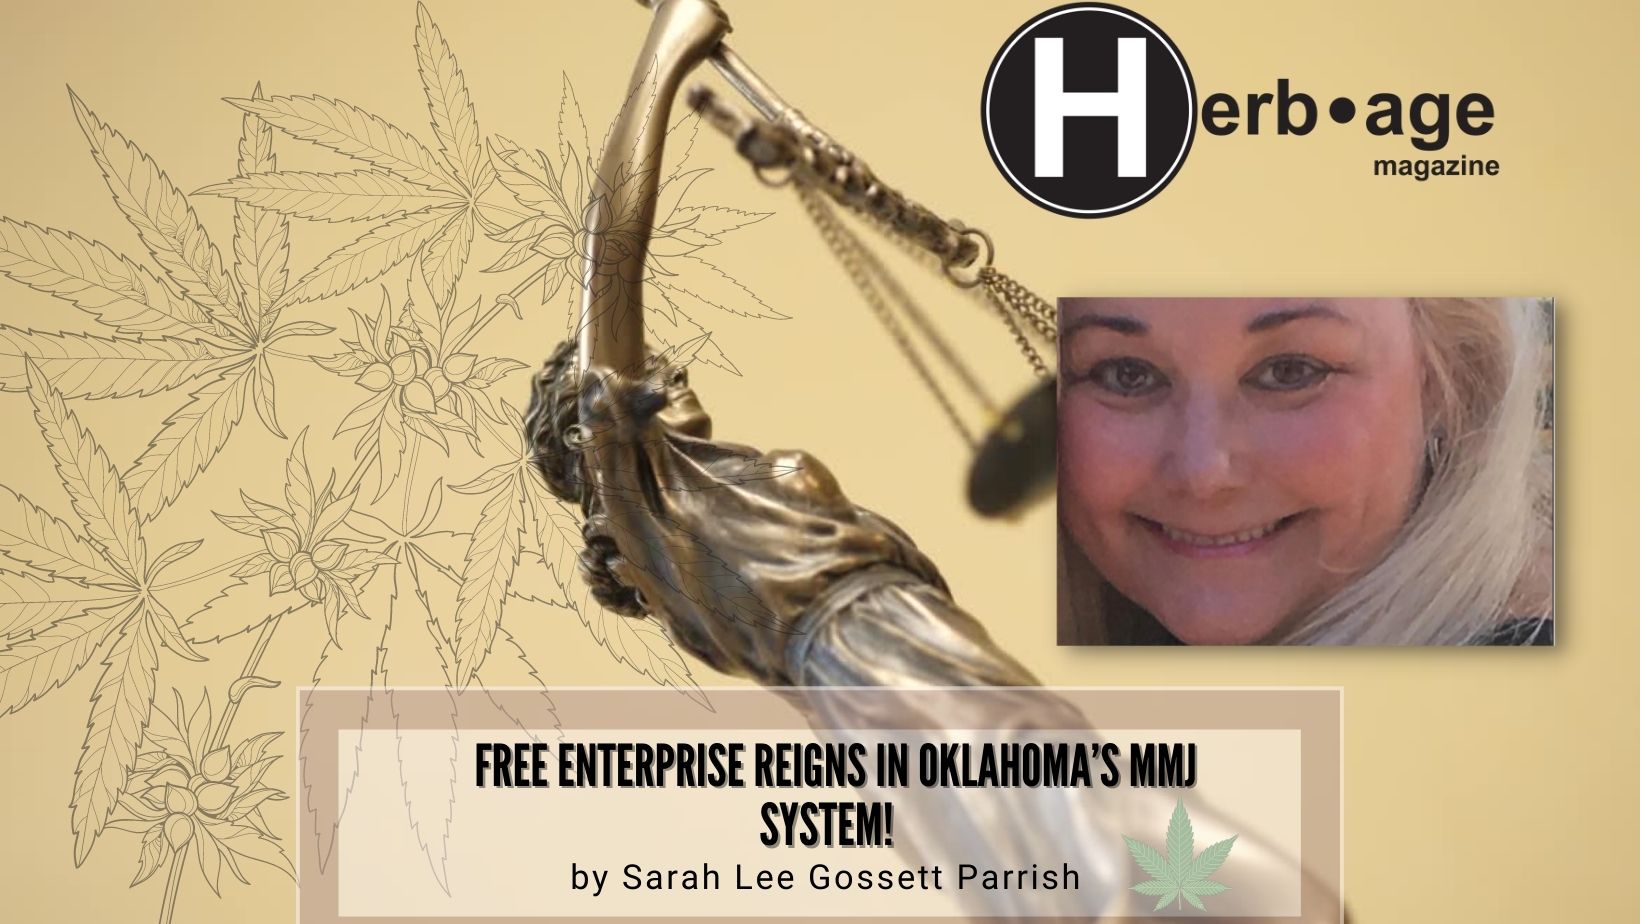  FREE ENTERPRISE REIGNS IN OKLAHOMA’S MMJ SYSTEM! 